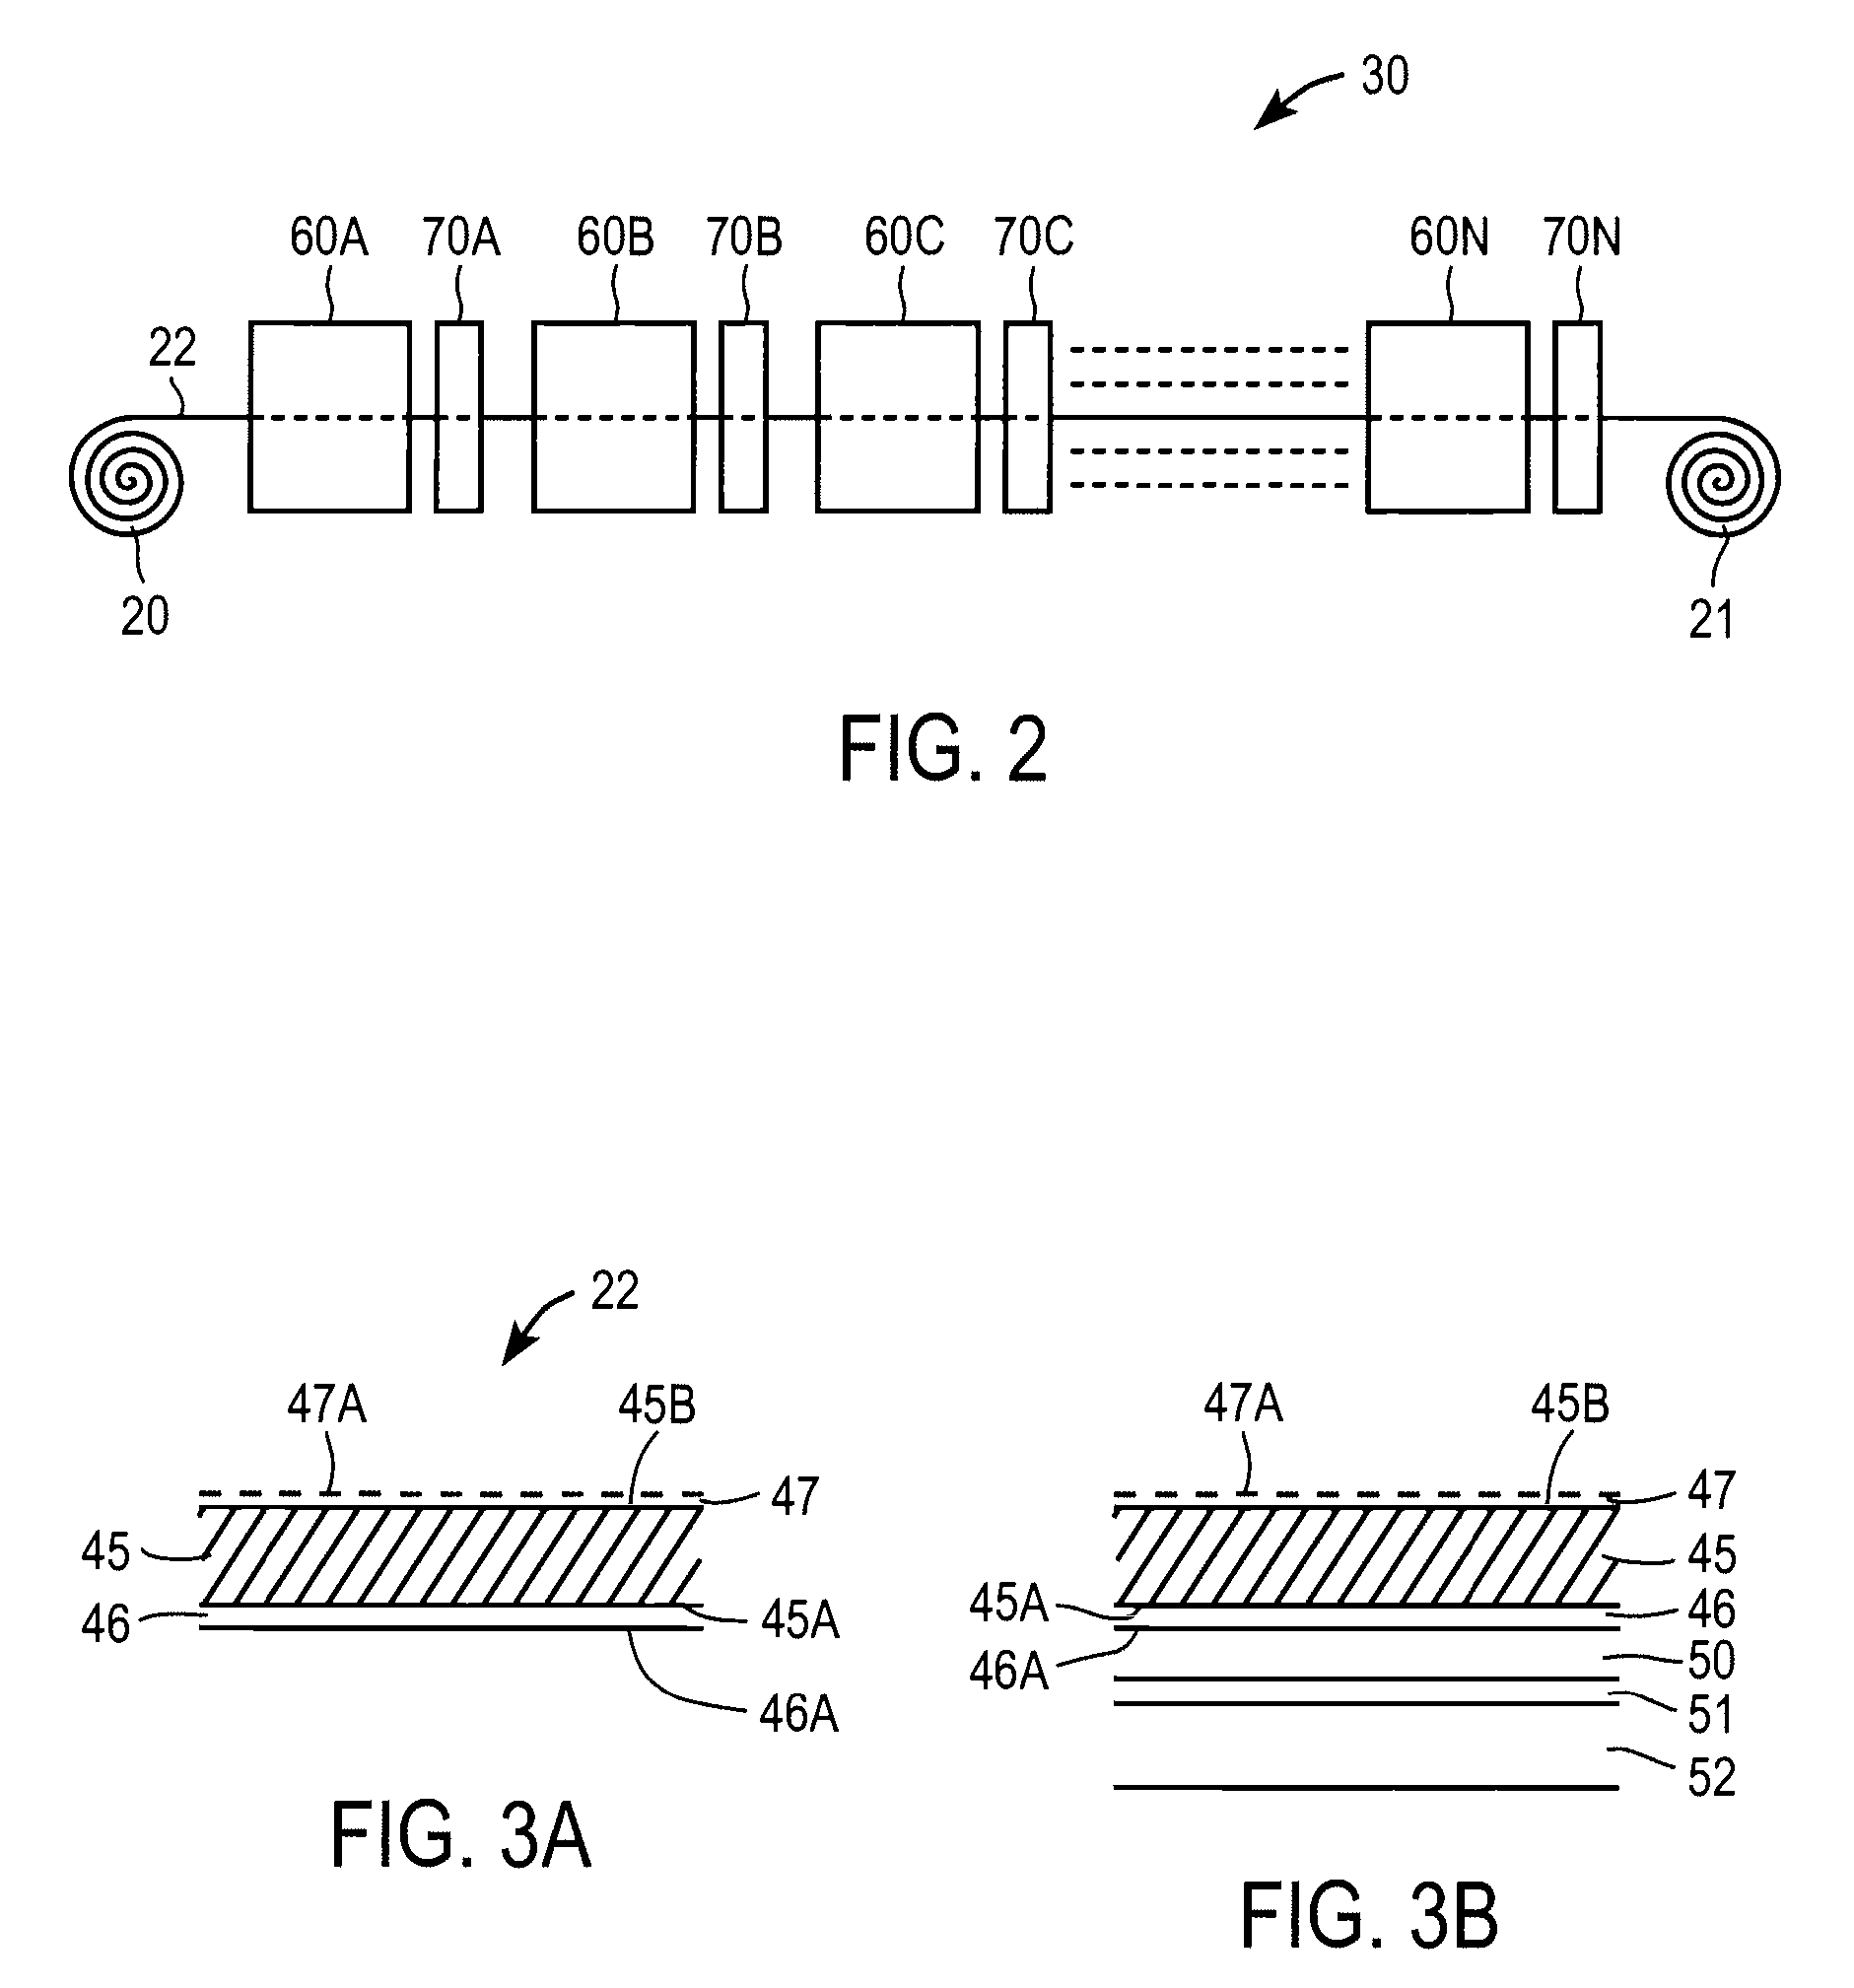 Composition control for roll-to-roll processed photovoltaic films